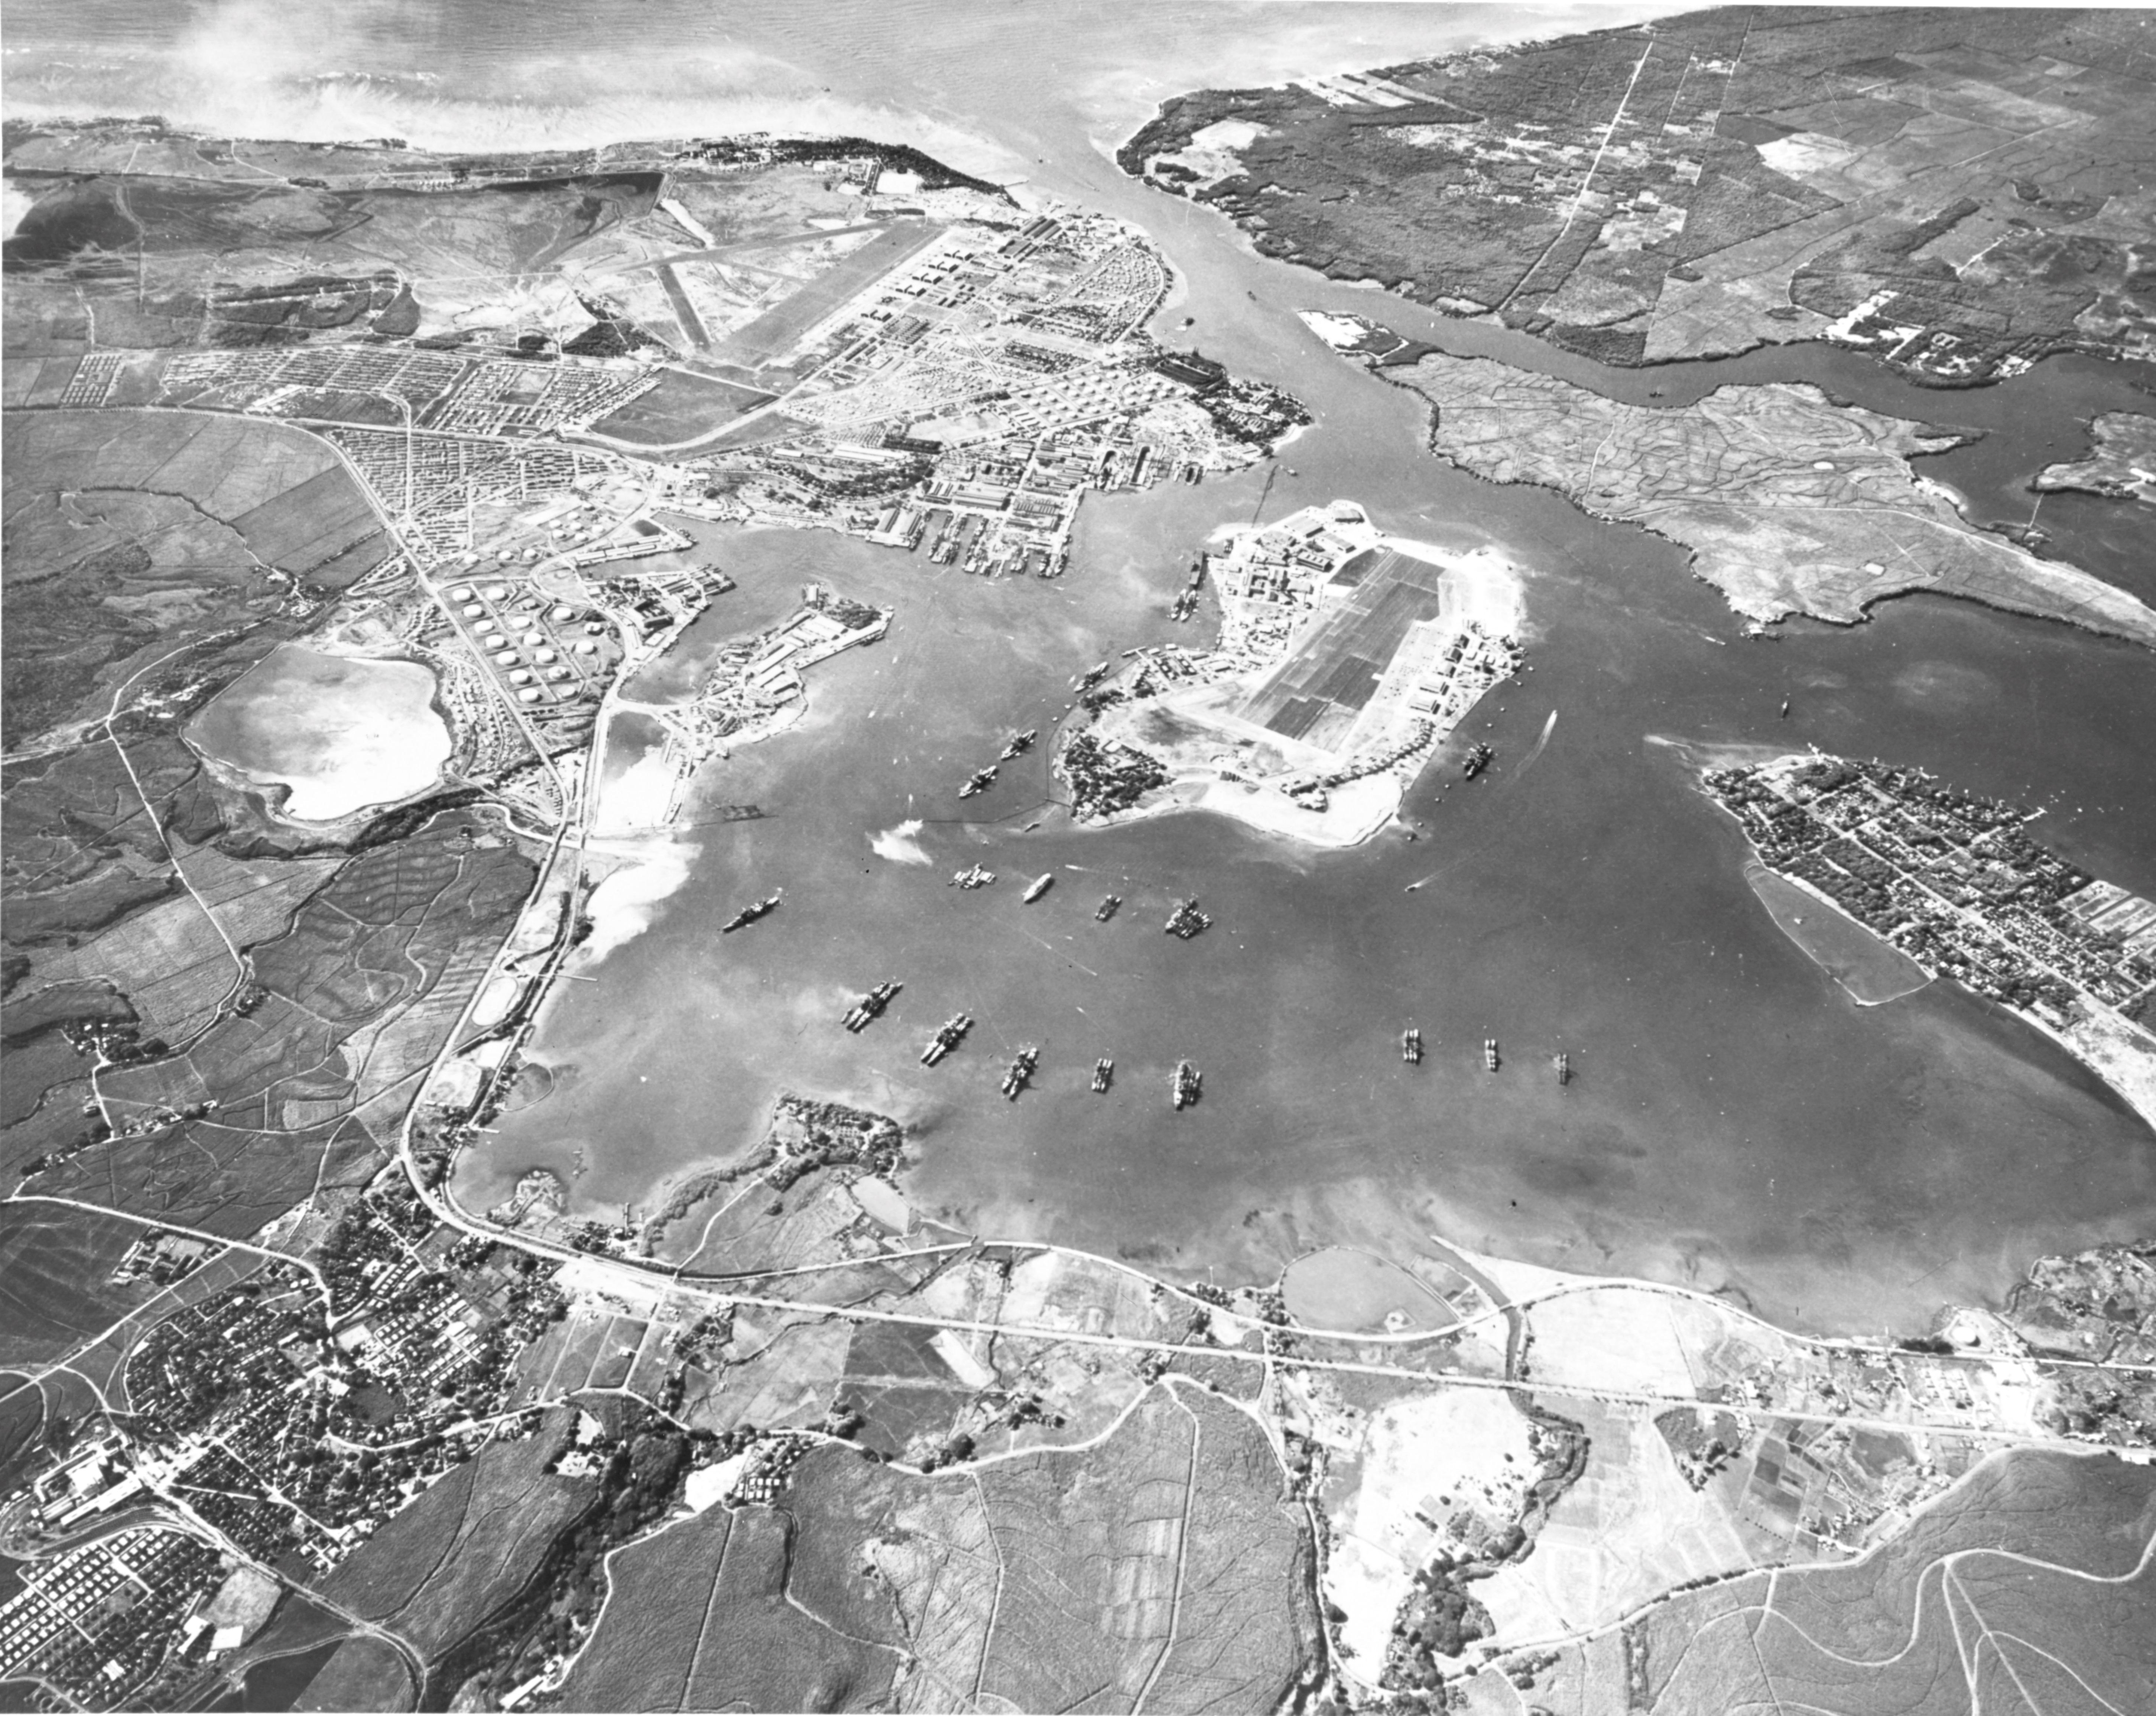 Overhead view of Pearl Harbor Naval Base, Oahu, Hawaii, 30 Oct 1941, 5 weeks before the attack. Photo 1 of 2.